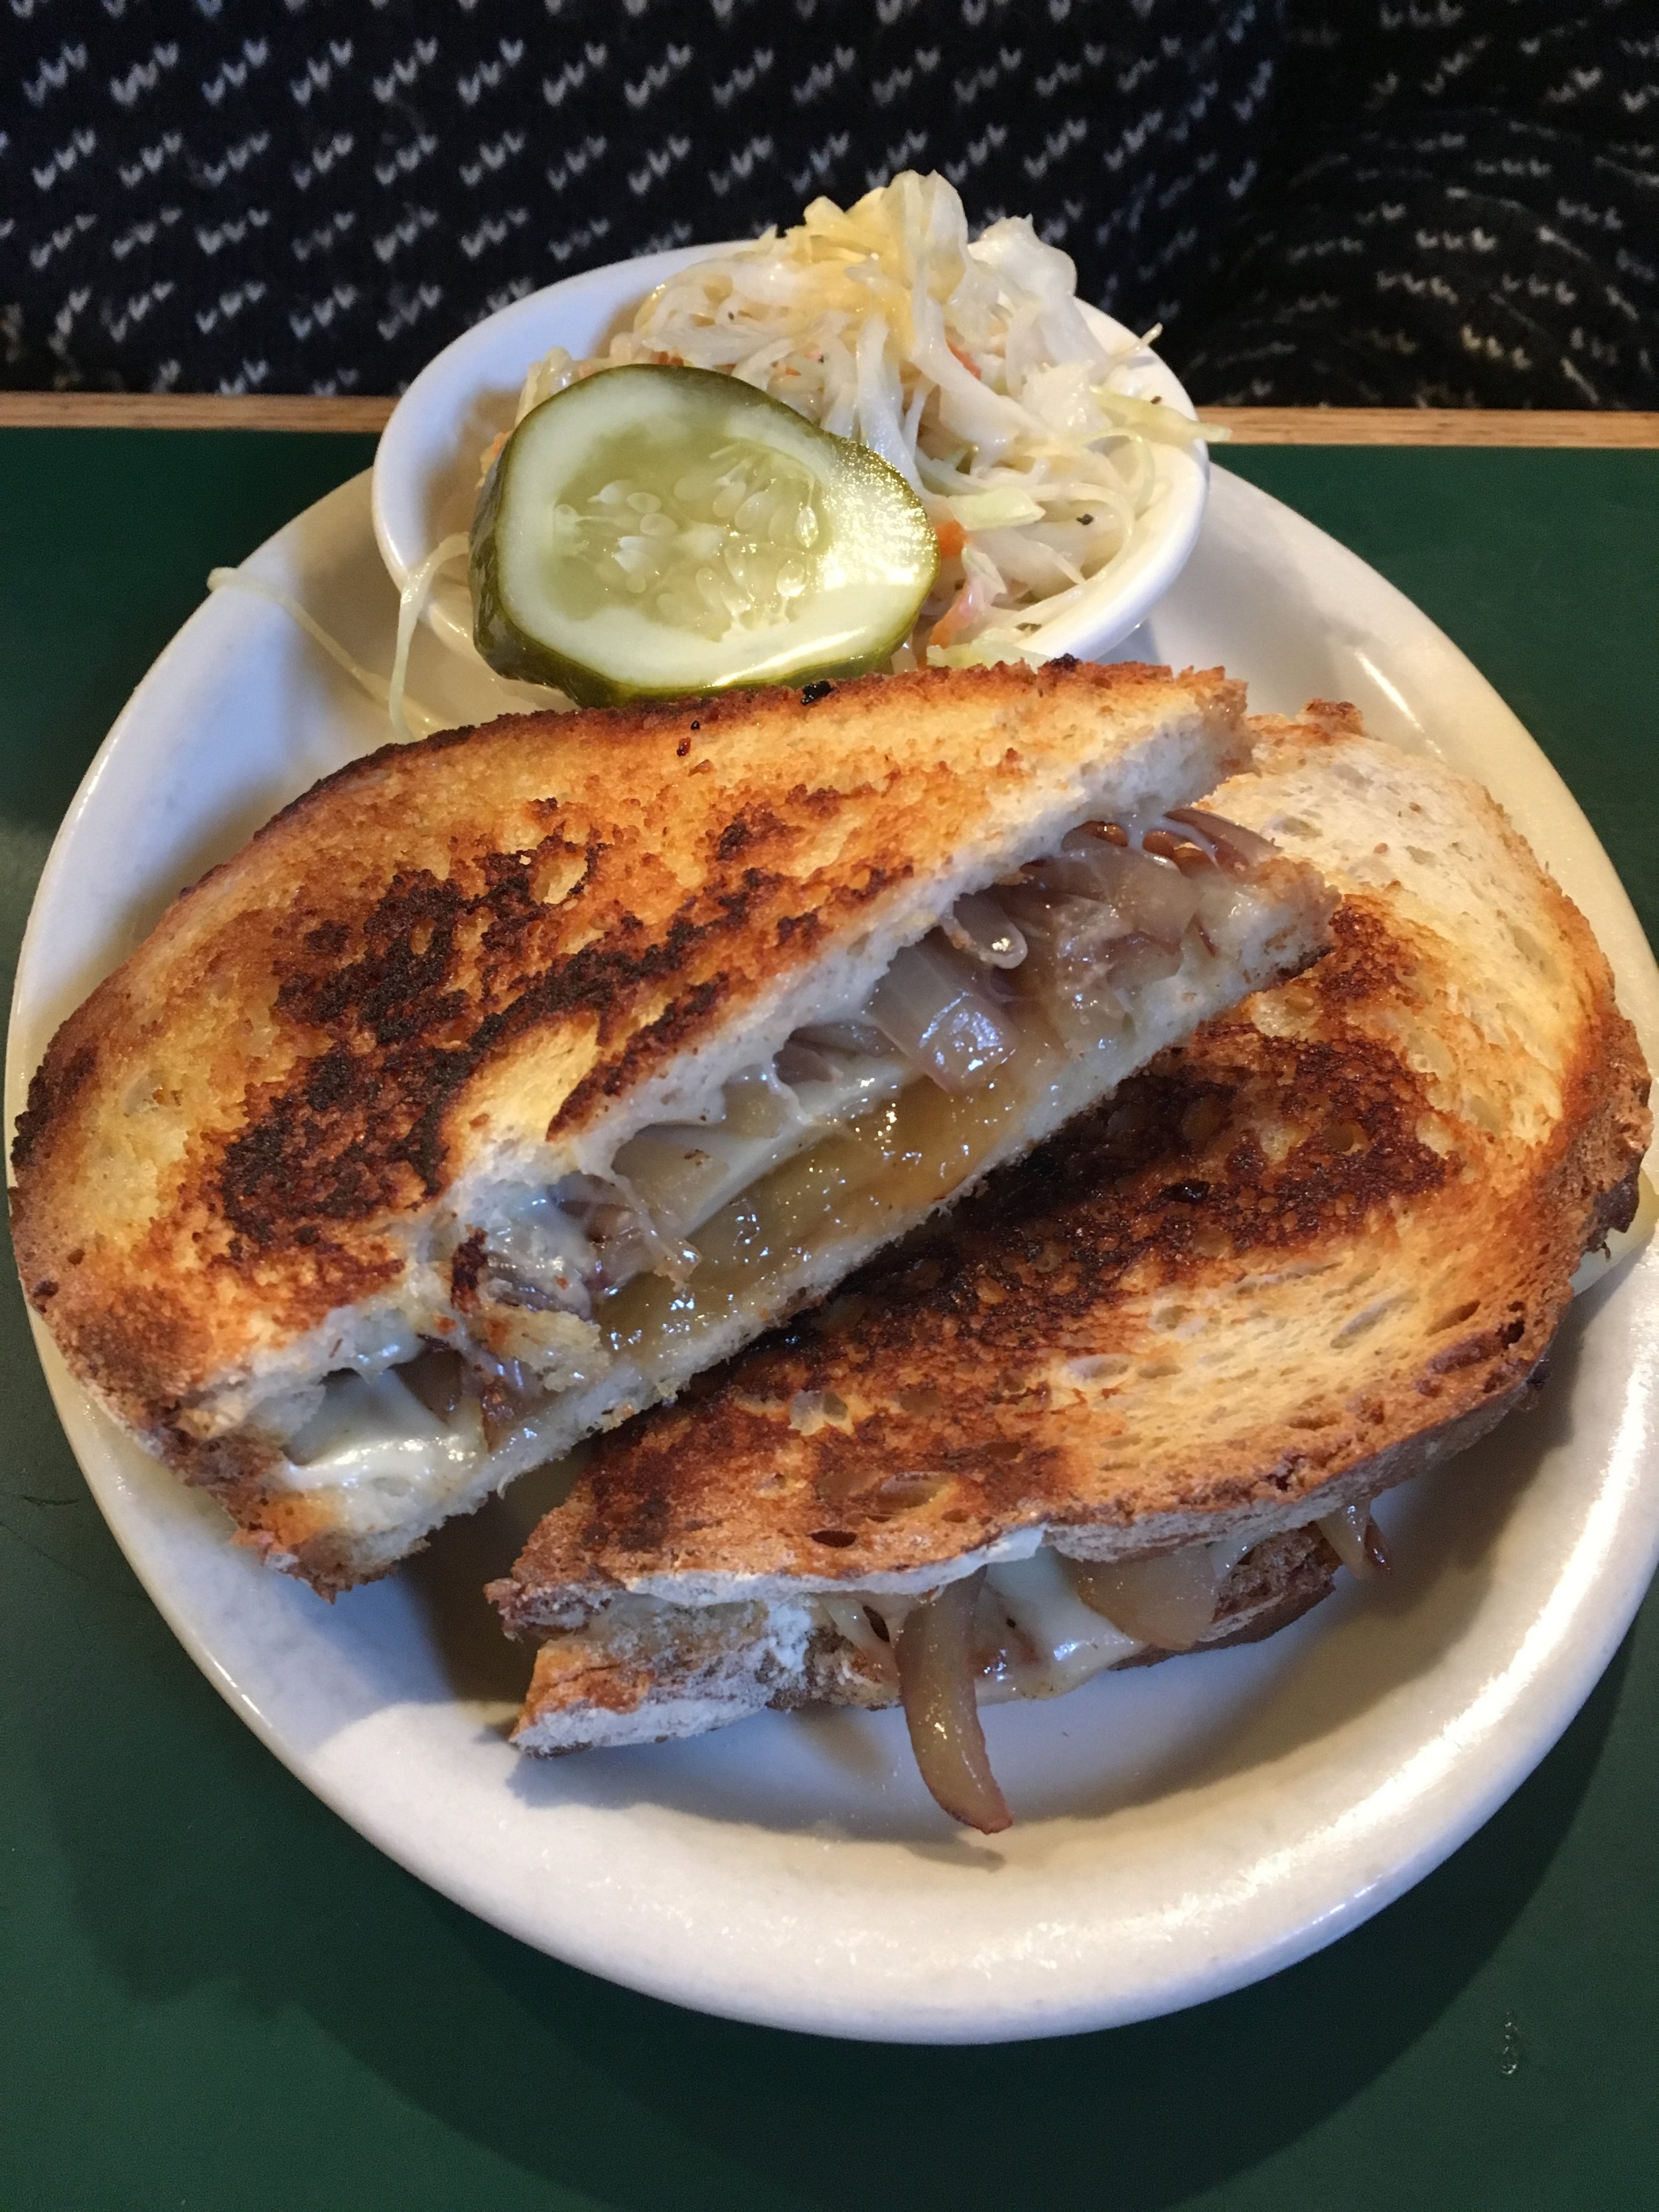 Ooh fancy! French Onion grilled cheese